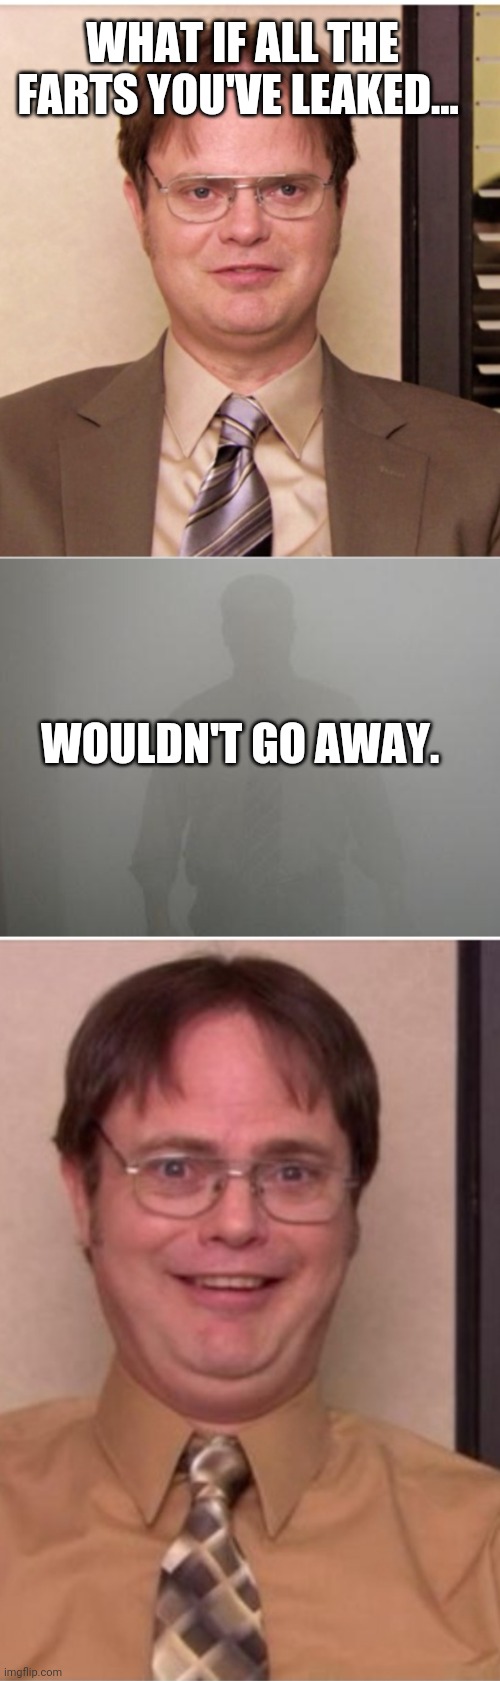 WHAT IF ALL THE FARTS YOU'VE LEAKED... WOULDN'T GO AWAY. | image tagged in farts,the office,dwight schrute,funny,funny memes | made w/ Imgflip meme maker